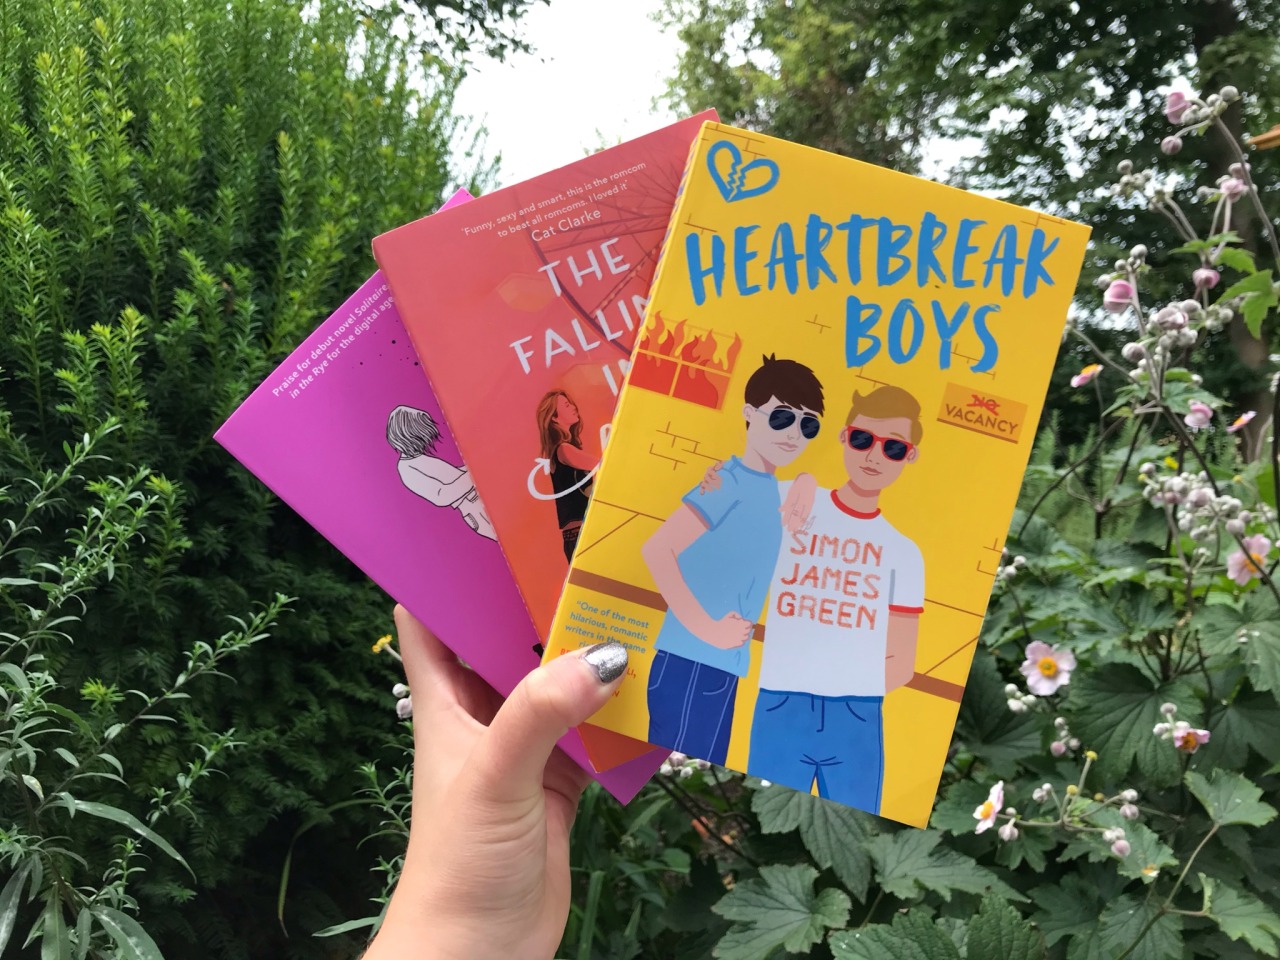 three books shown with their covers towards the camera, heartbreak boys, the falling in love montage behind it and loveless at the end, bushes and flowers in the background